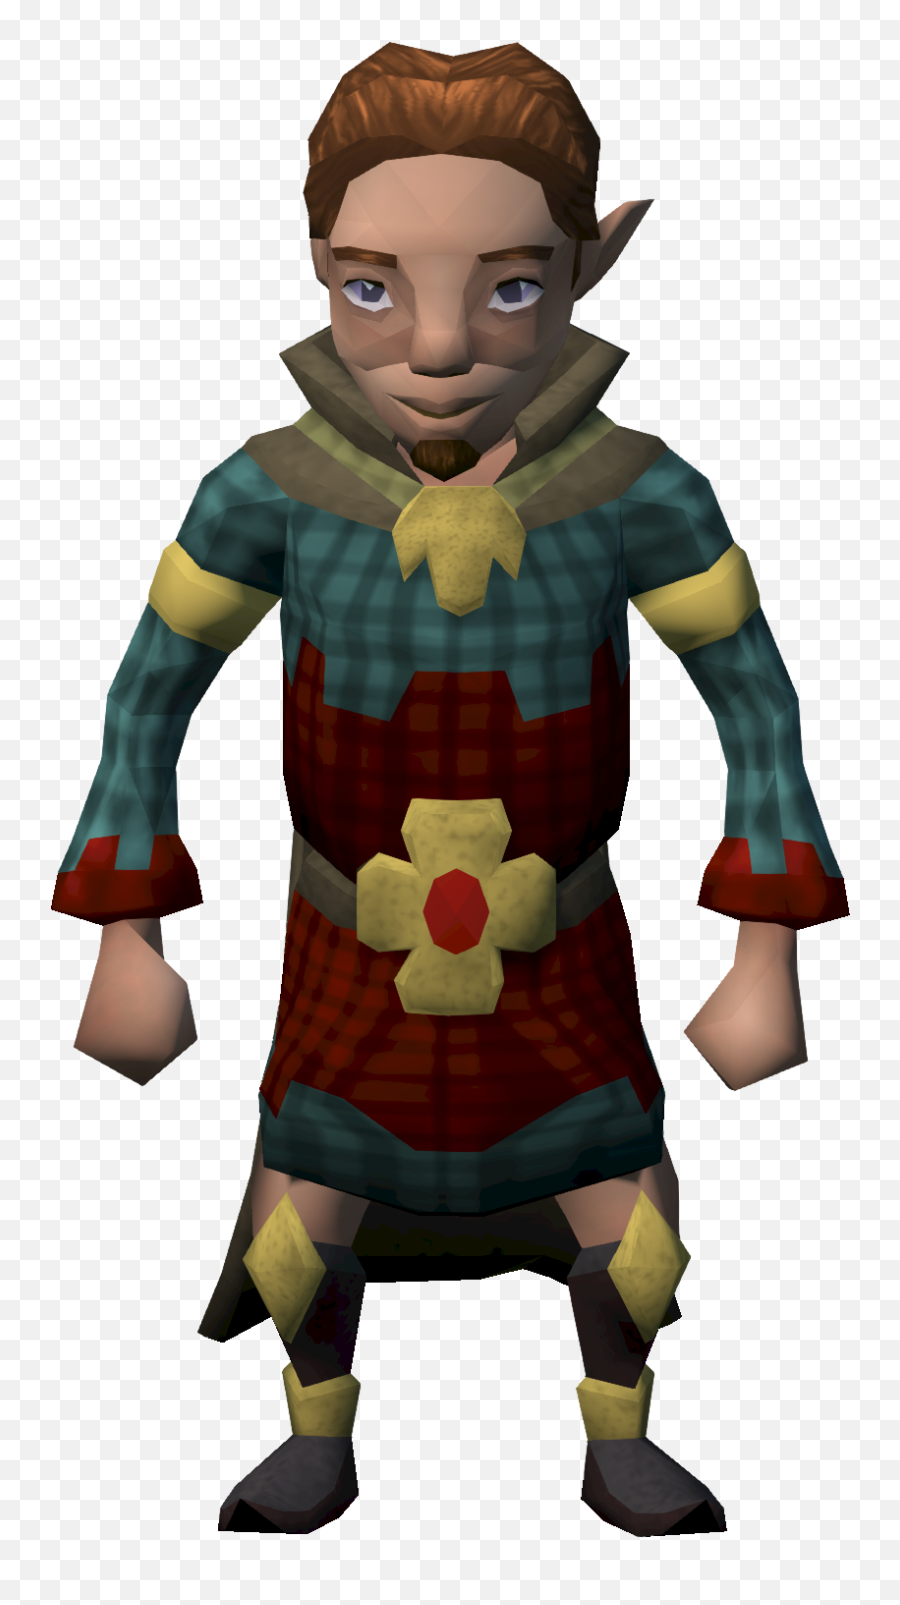 Gnome Child Png - Fictional Character,Gnome Child Png